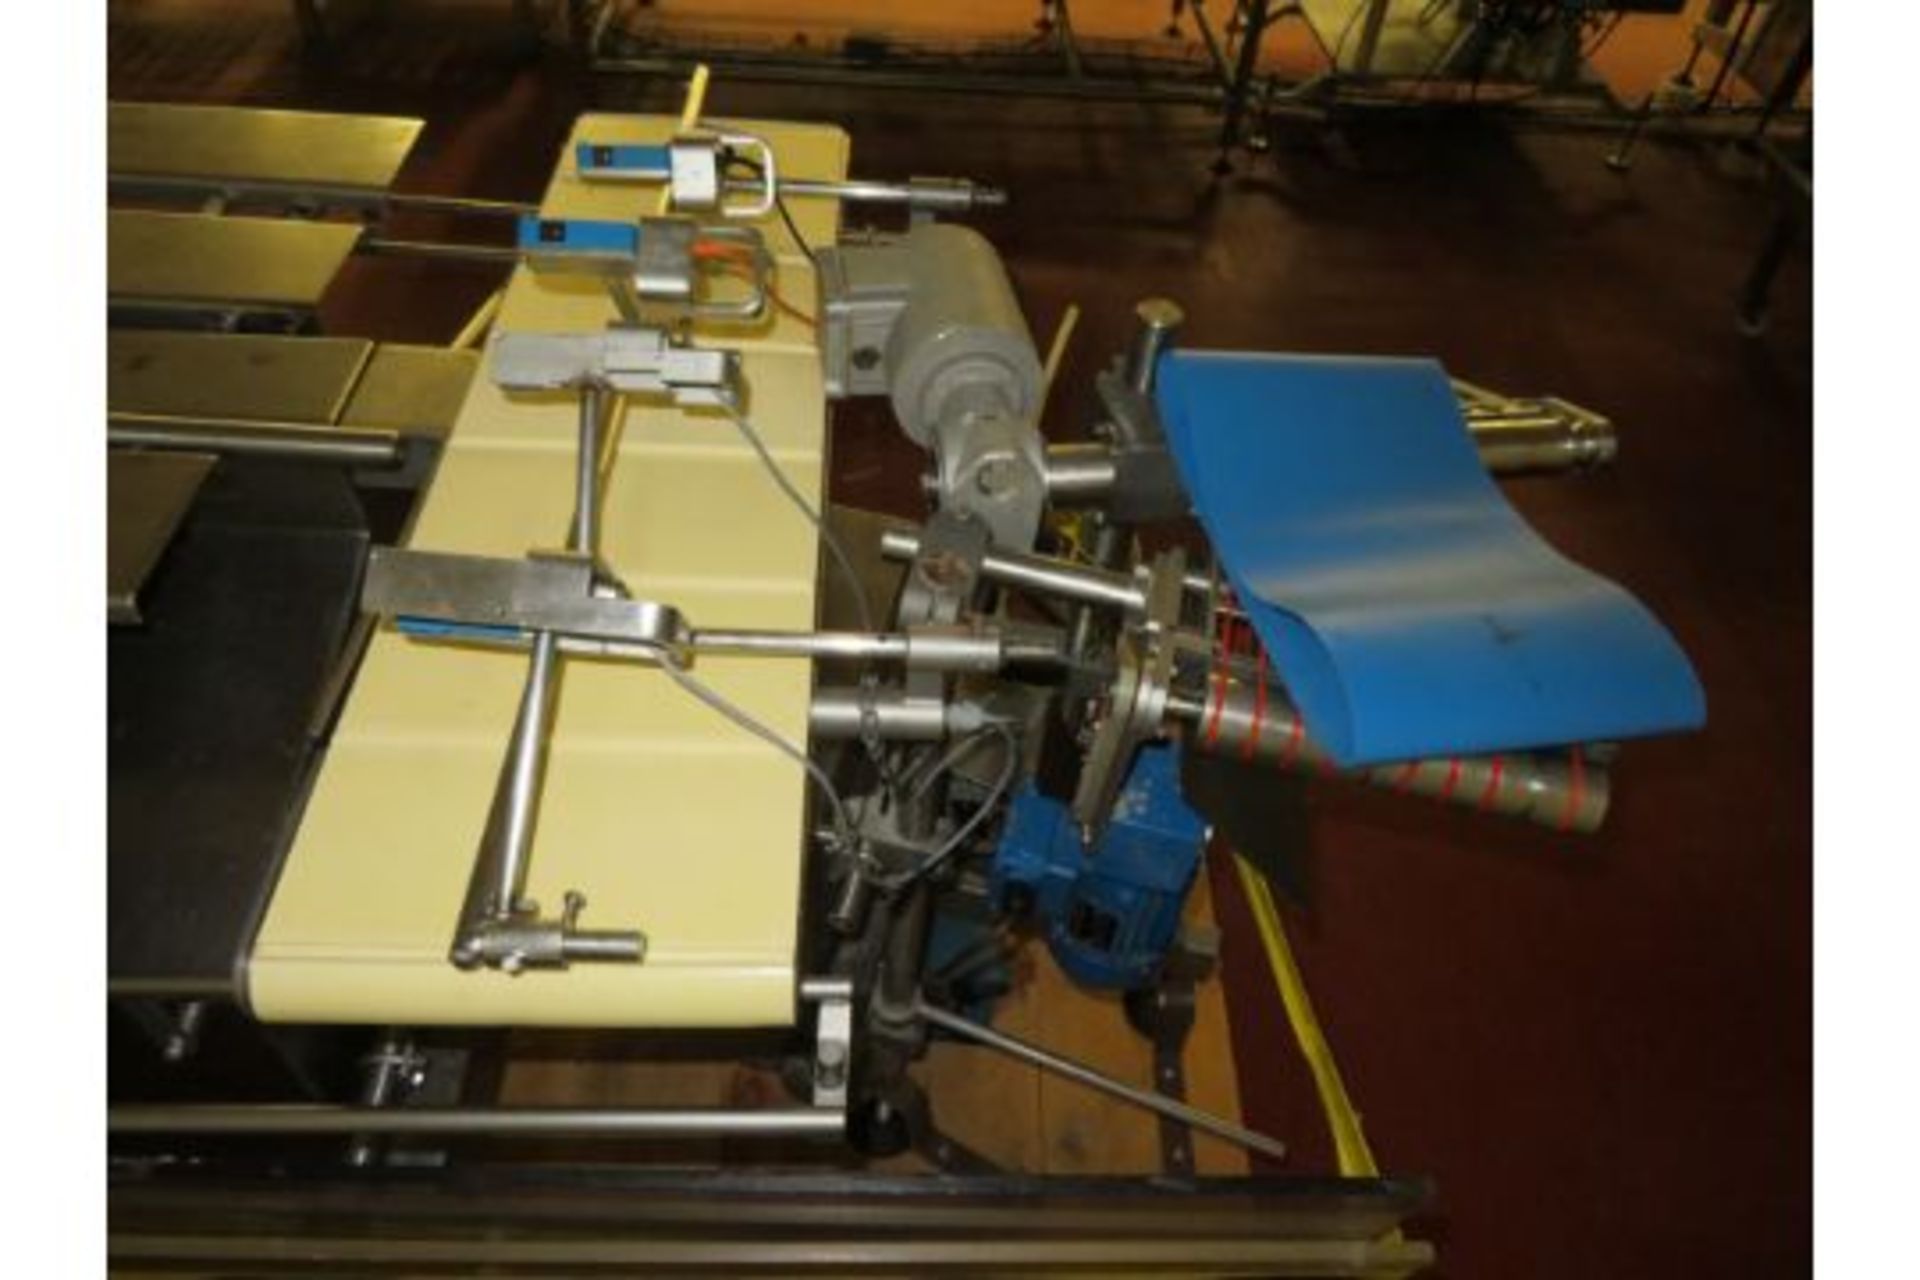 Nortwood Food Machinery Cheese Cutting Machine, Alpma Cut 25 Section and Ismeda DACS Check Weighter - Image 20 of 41